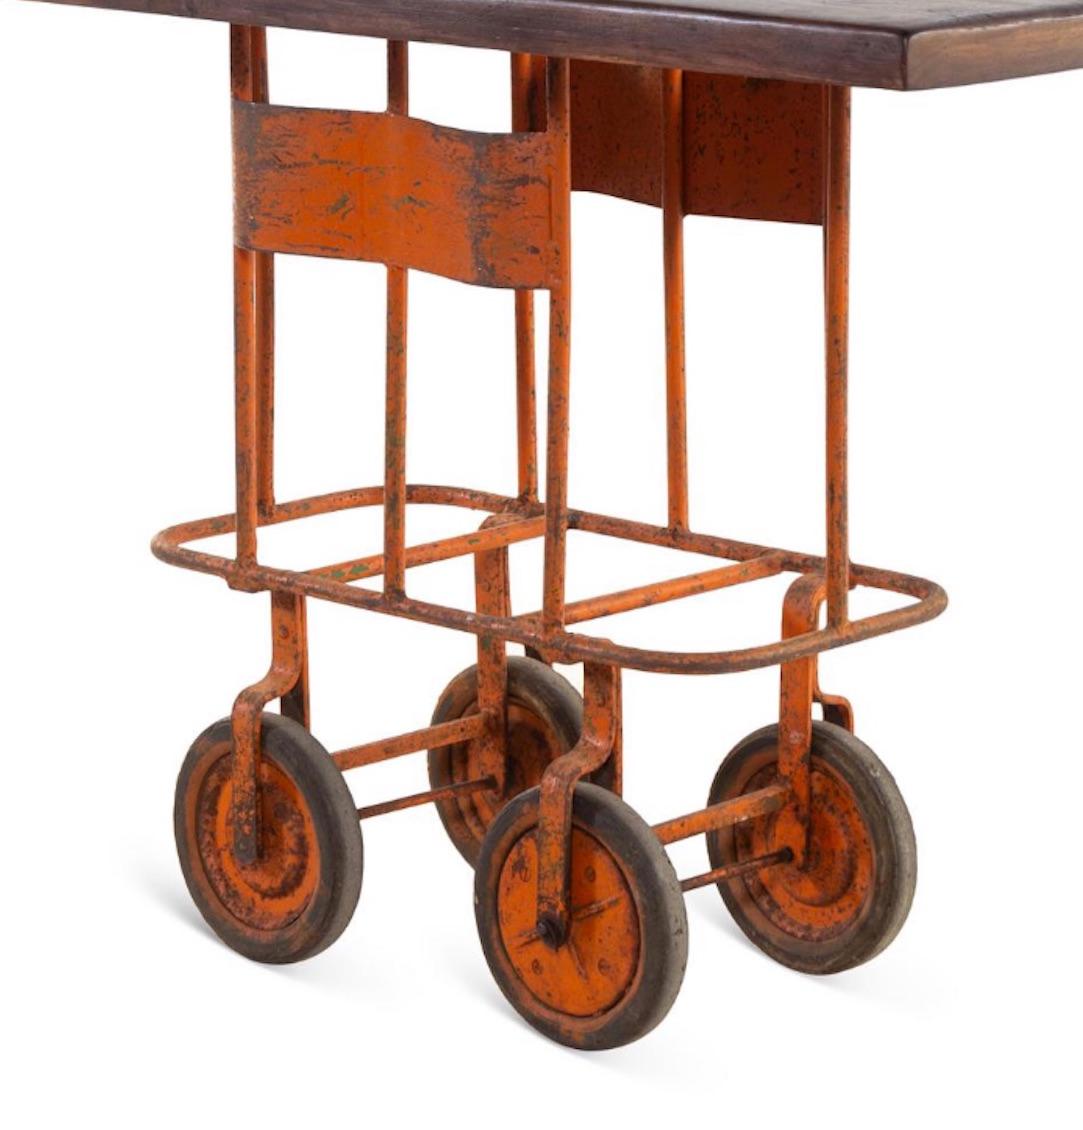 20th Century Industrial Cart Base Converted into Kitchen Island or Bar Cart, Great Color